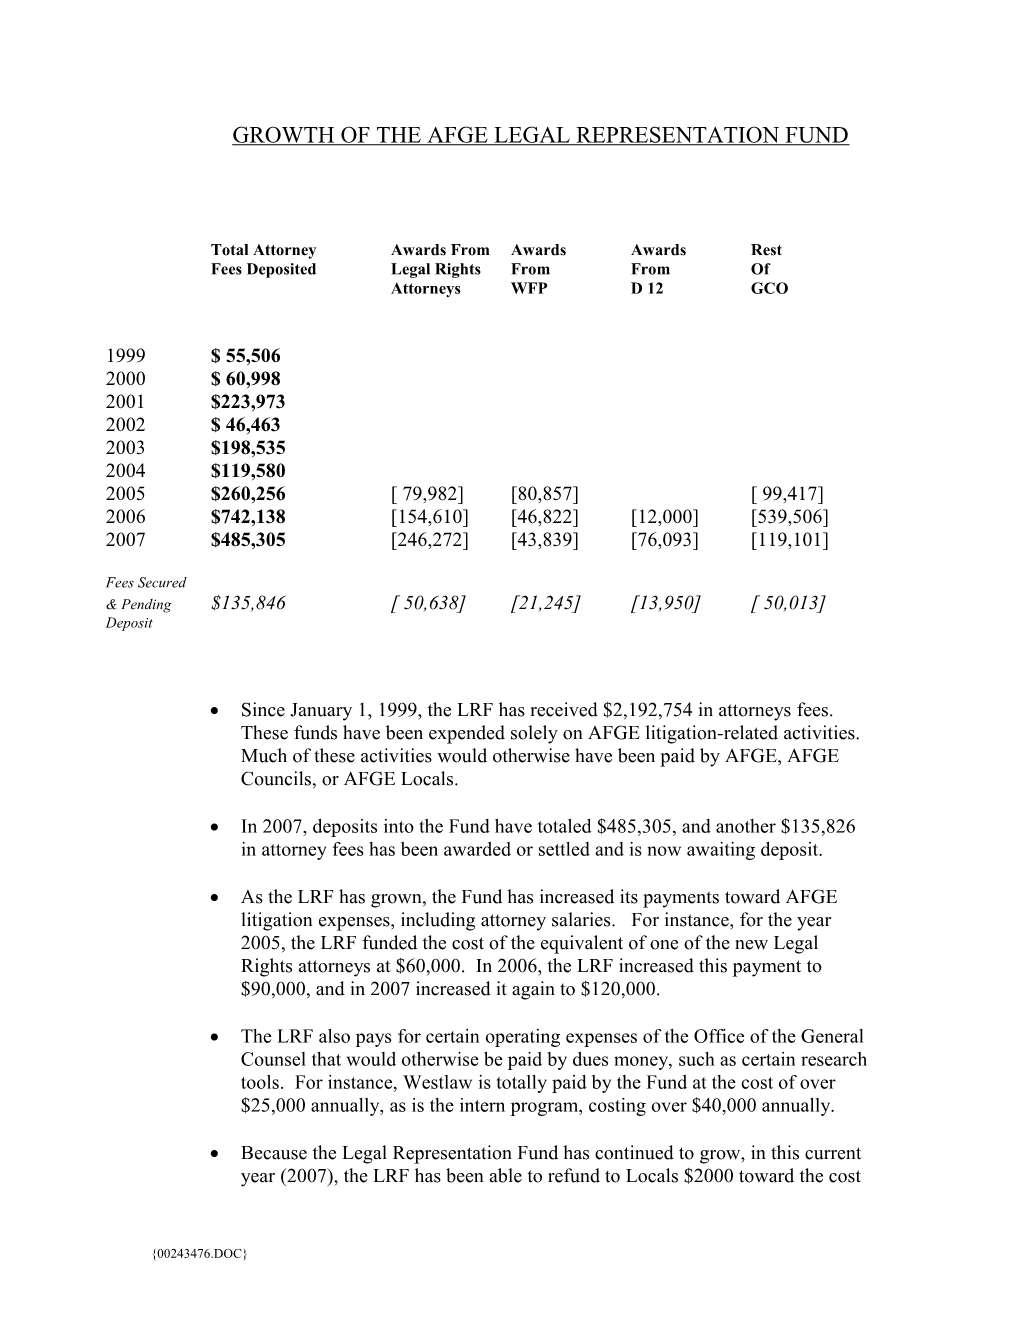 2007 LRF Fee Report Draft, Final End of Year (00243476;1)